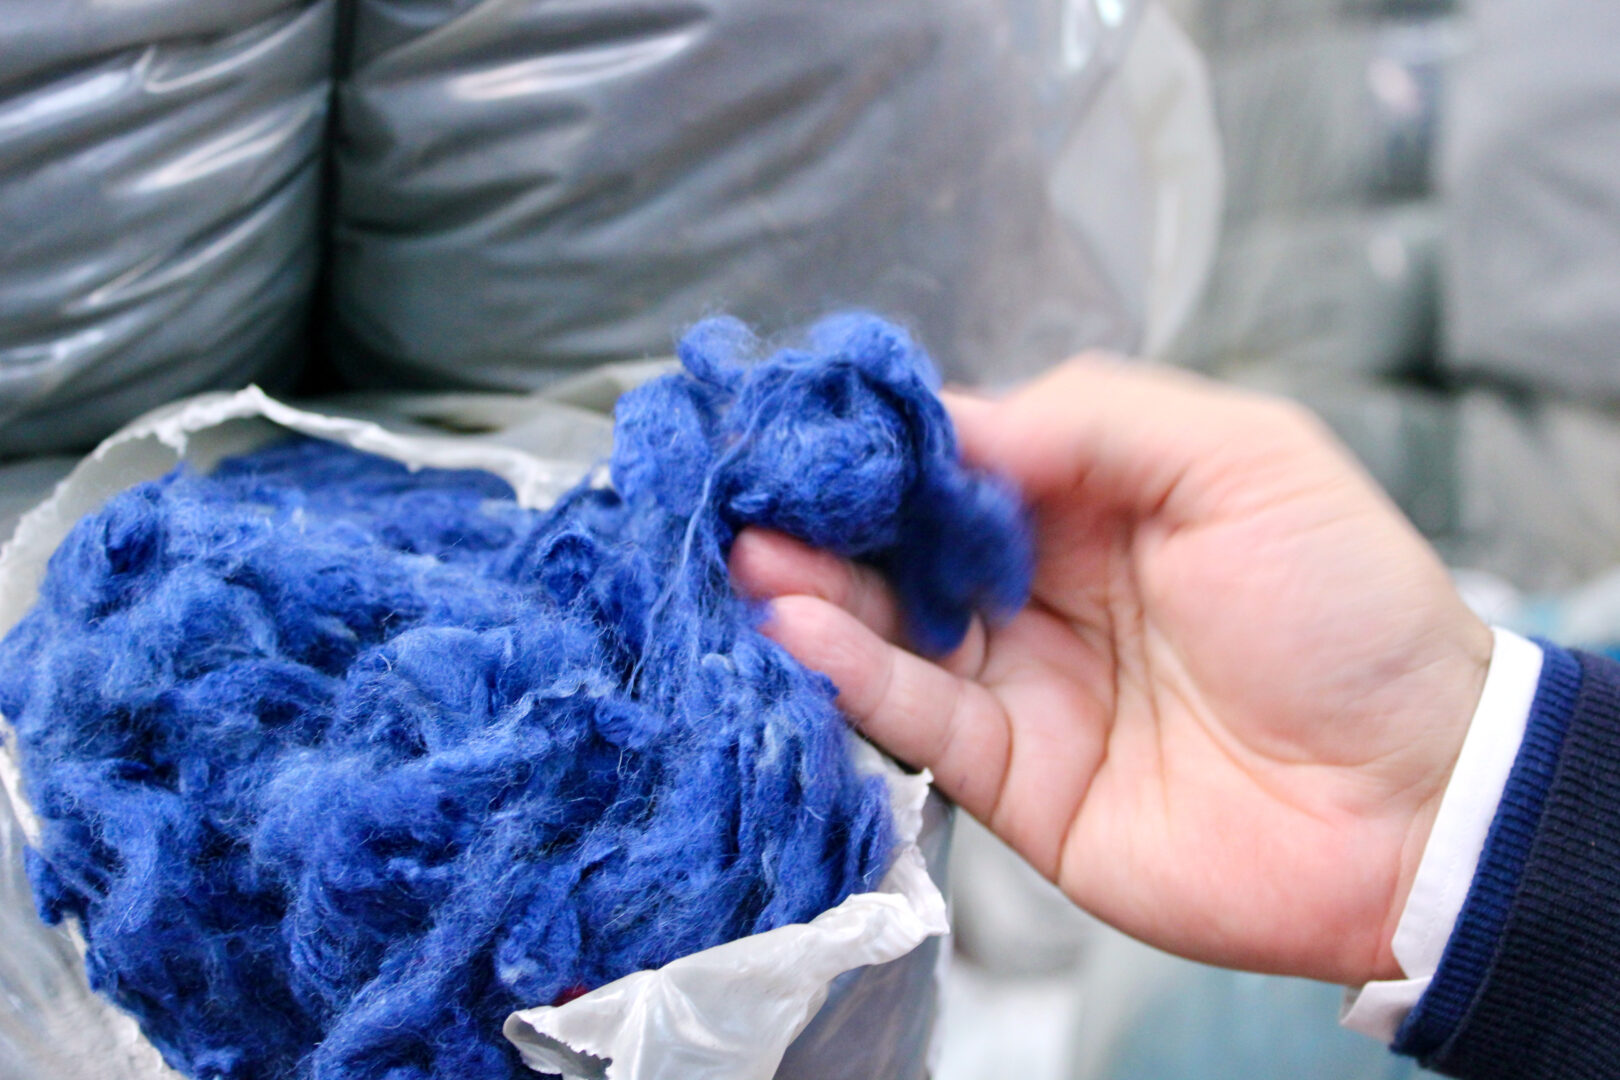 Evaluation of fibers before the carding process in a local spinning mill. Carded yarns made of regenerated wool are a typical product of the the textile district and have a long standing history. Photo: Rosa Sonntag